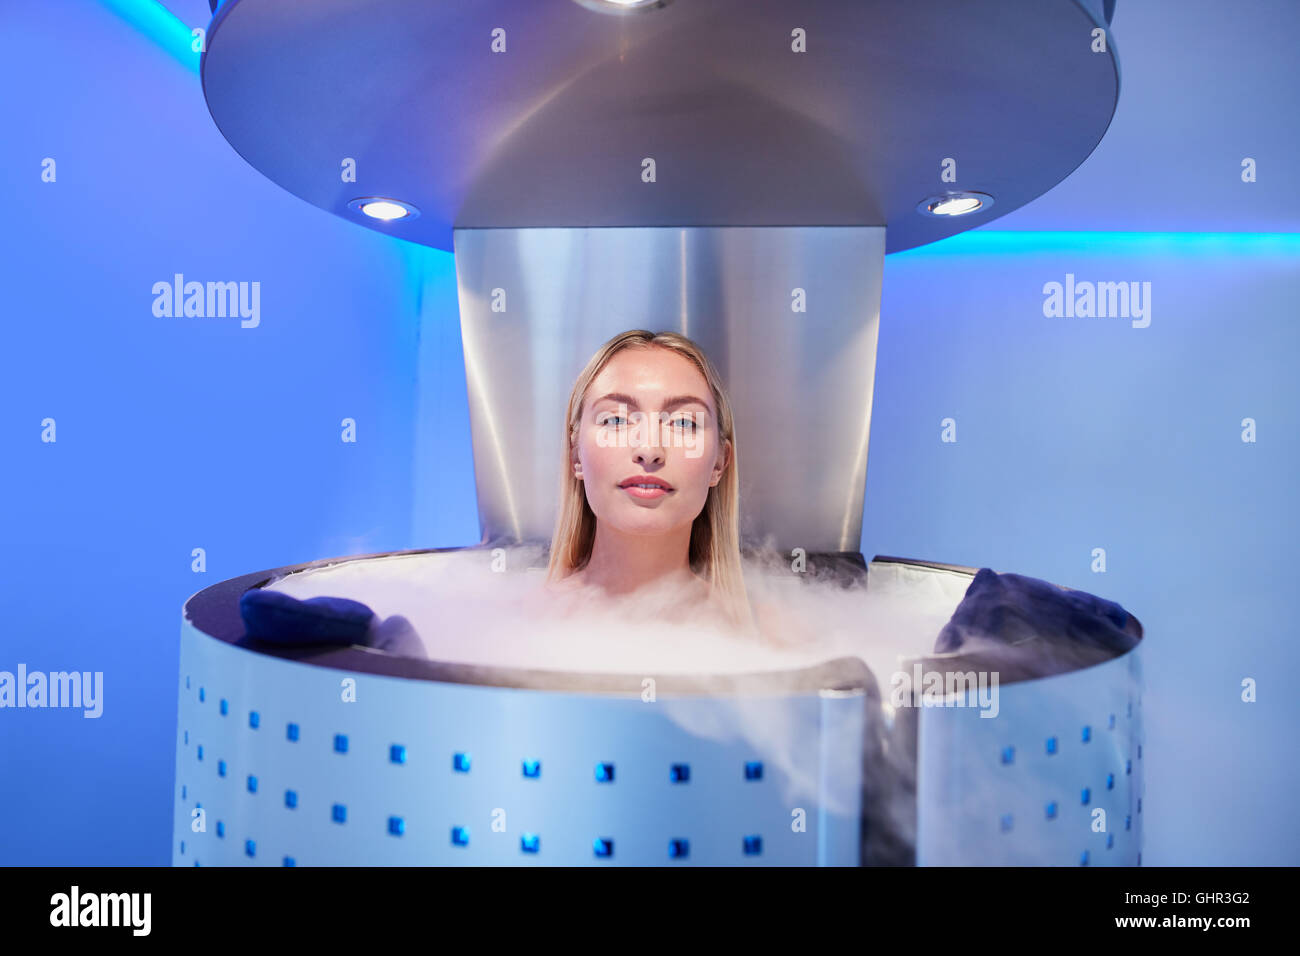 Woman in cryosauna booth for whole body cryotherapy. Caucasian female in freezing chamber with nitrogen vapors. Stock Photo